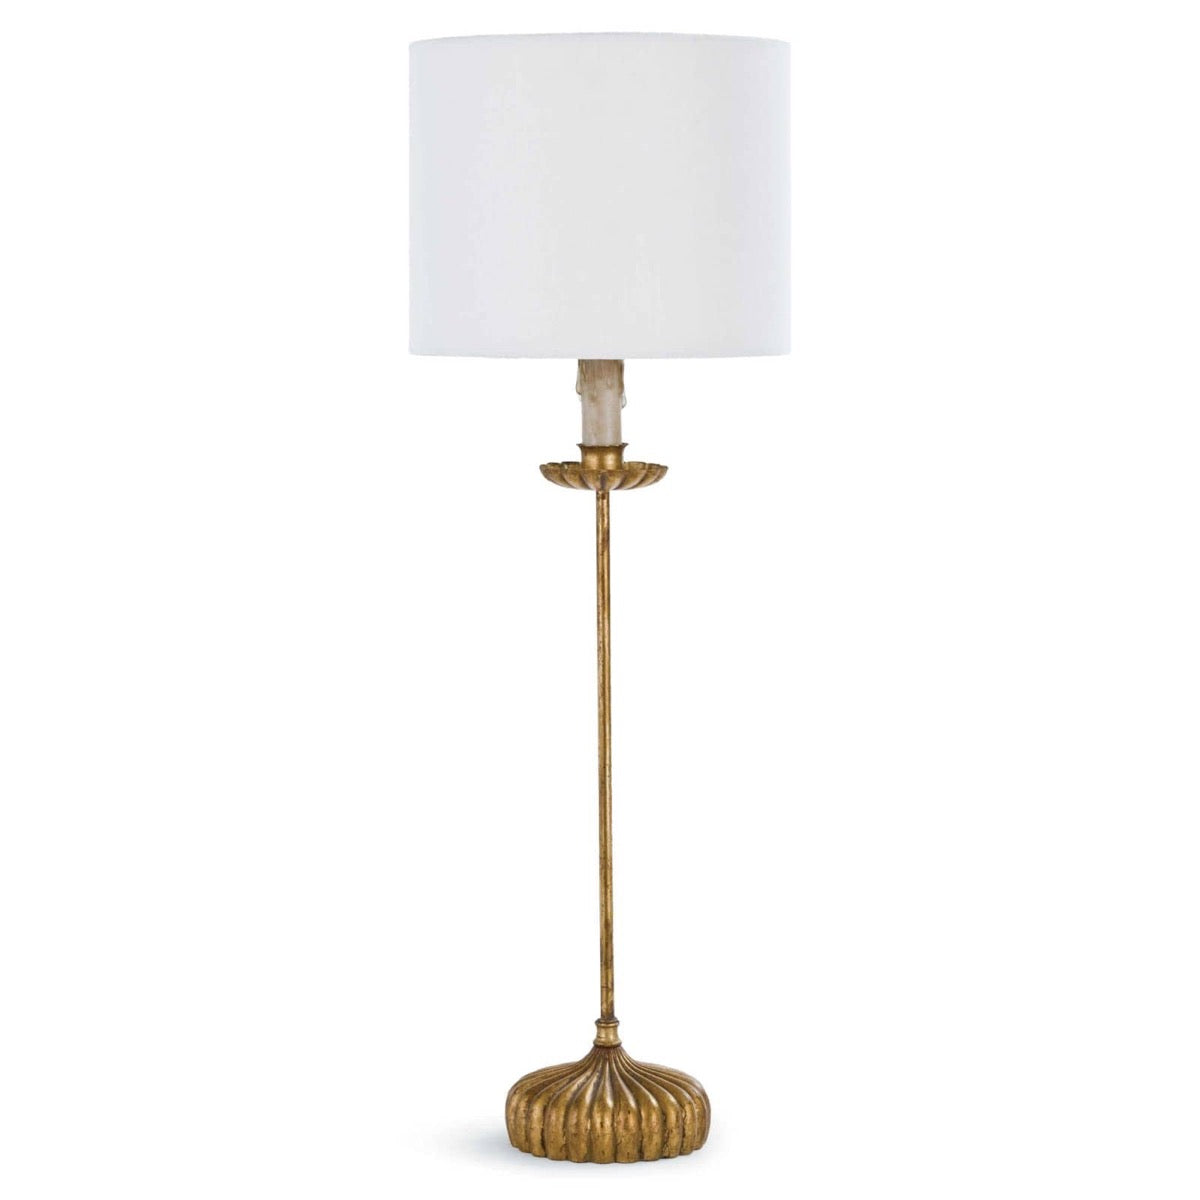 Carson Buffet Table Lamp White. Front view.